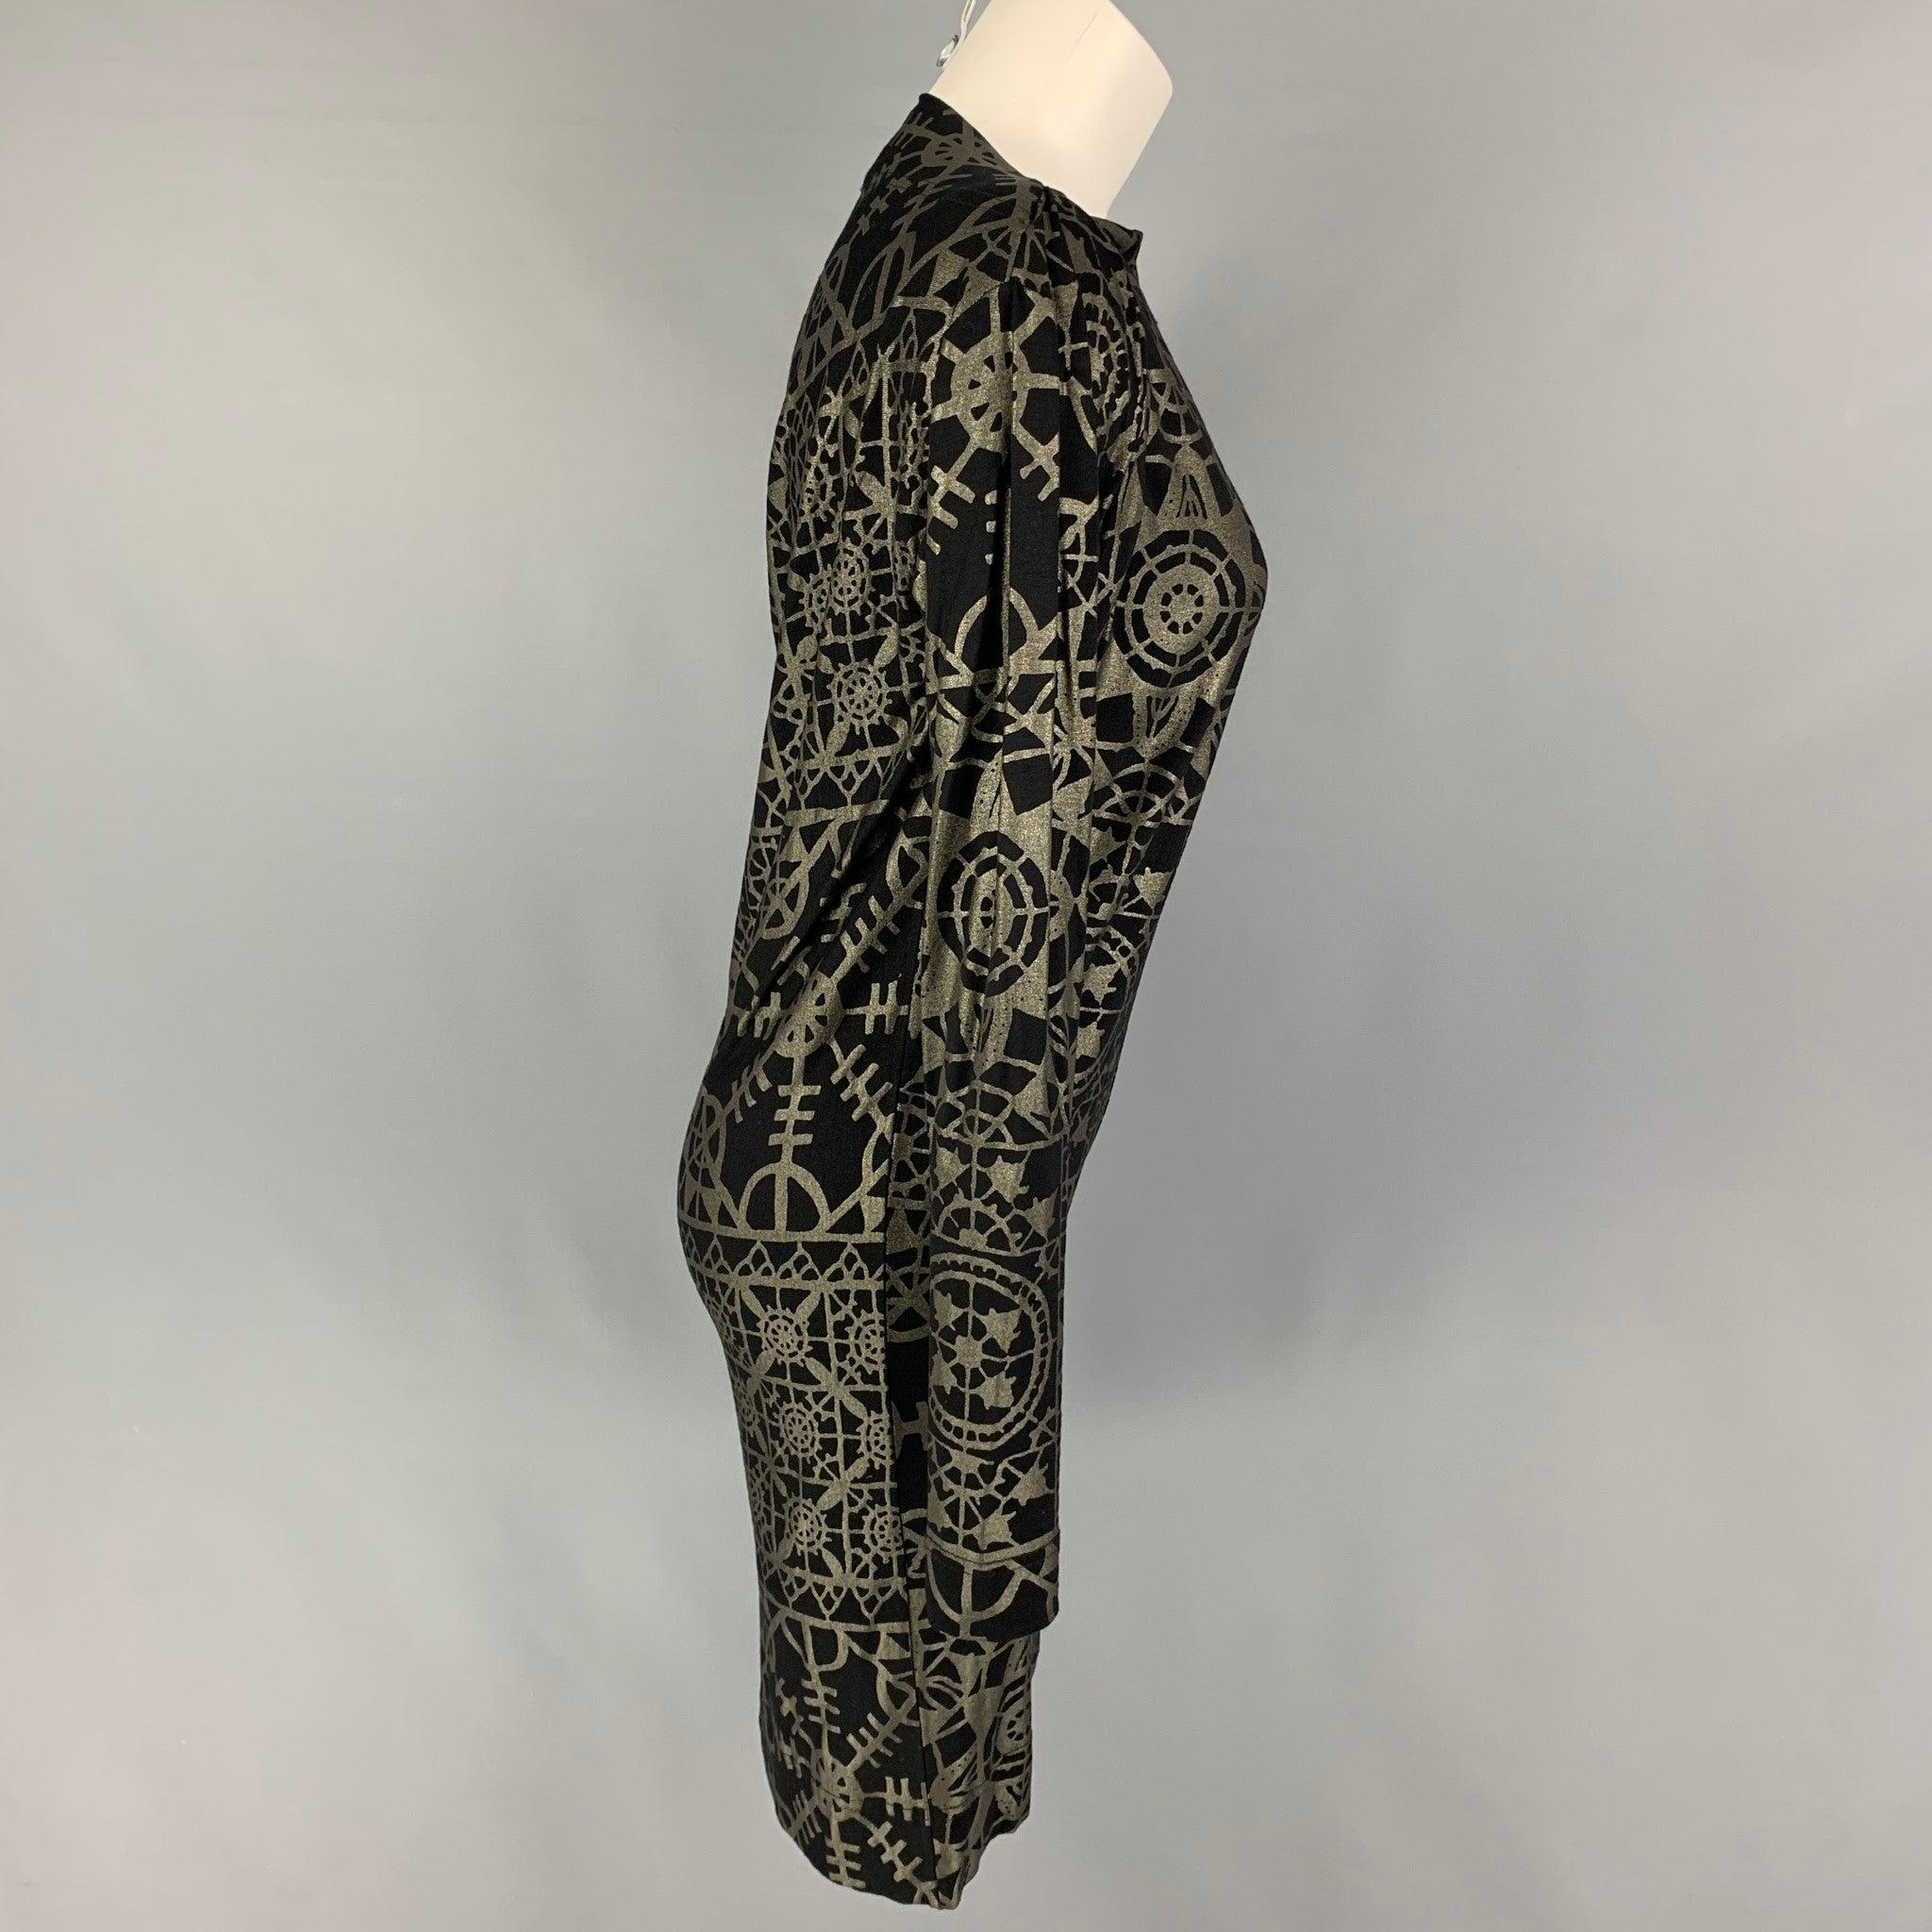 VIVIENNE WESTWOOD ANGLOMANIA dress comes in a black & silver abstract viscose blend featuring a ruched side detail, long sleeves, and a mock neckline.
Very Good
Pre-Owned Condition. 

Marked:   S 

Measurements: 
 
Shoulder: 18 inches  Bust: 34